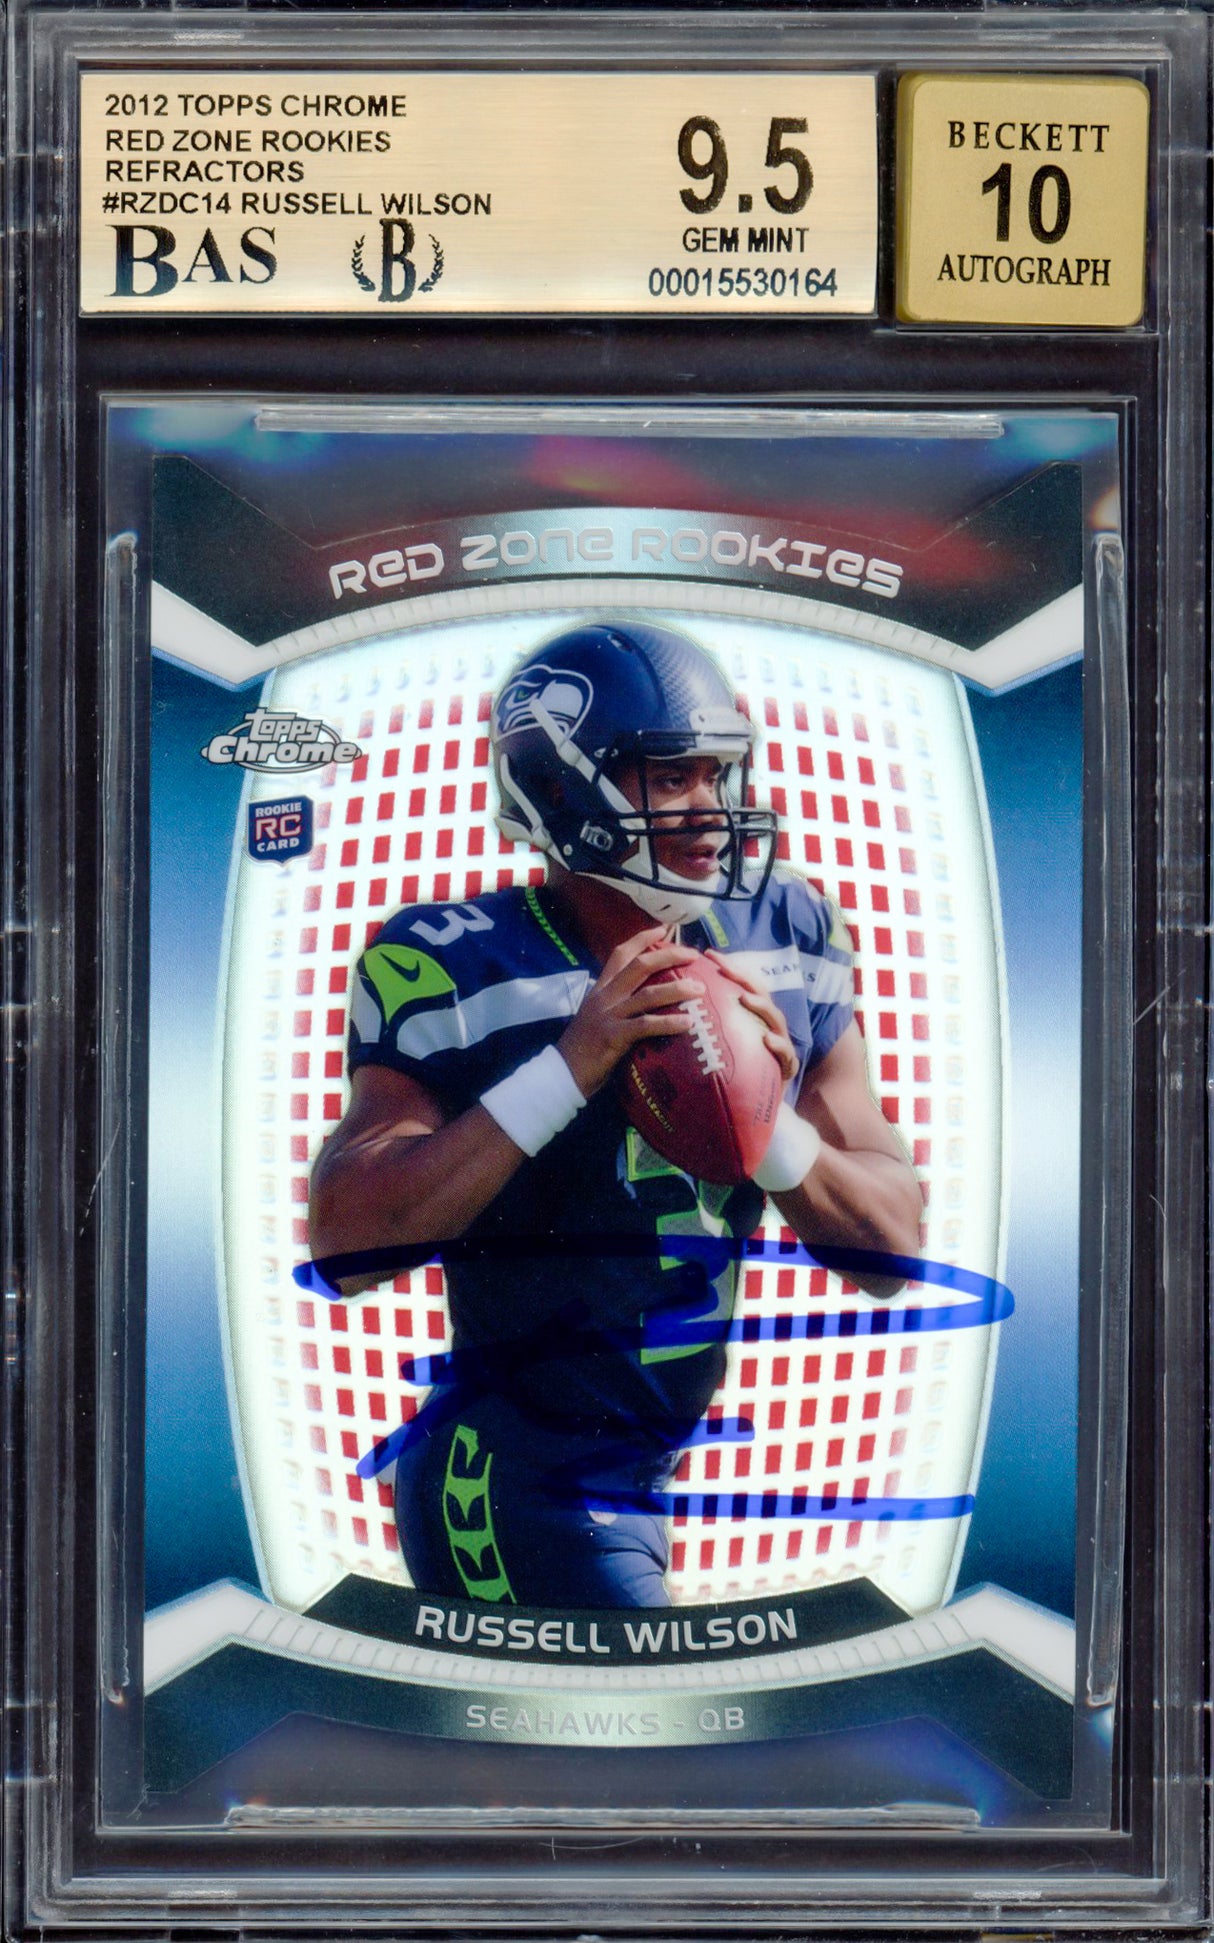 Russell Wilson Autographed 2012 Topps Chrome Red Zone Rookie Refractor Rookie Card #RZDC-14 Seattle Seahawks BGS 9.5 Auto Grade Gem Mint 10 Beckett BAS #15530164